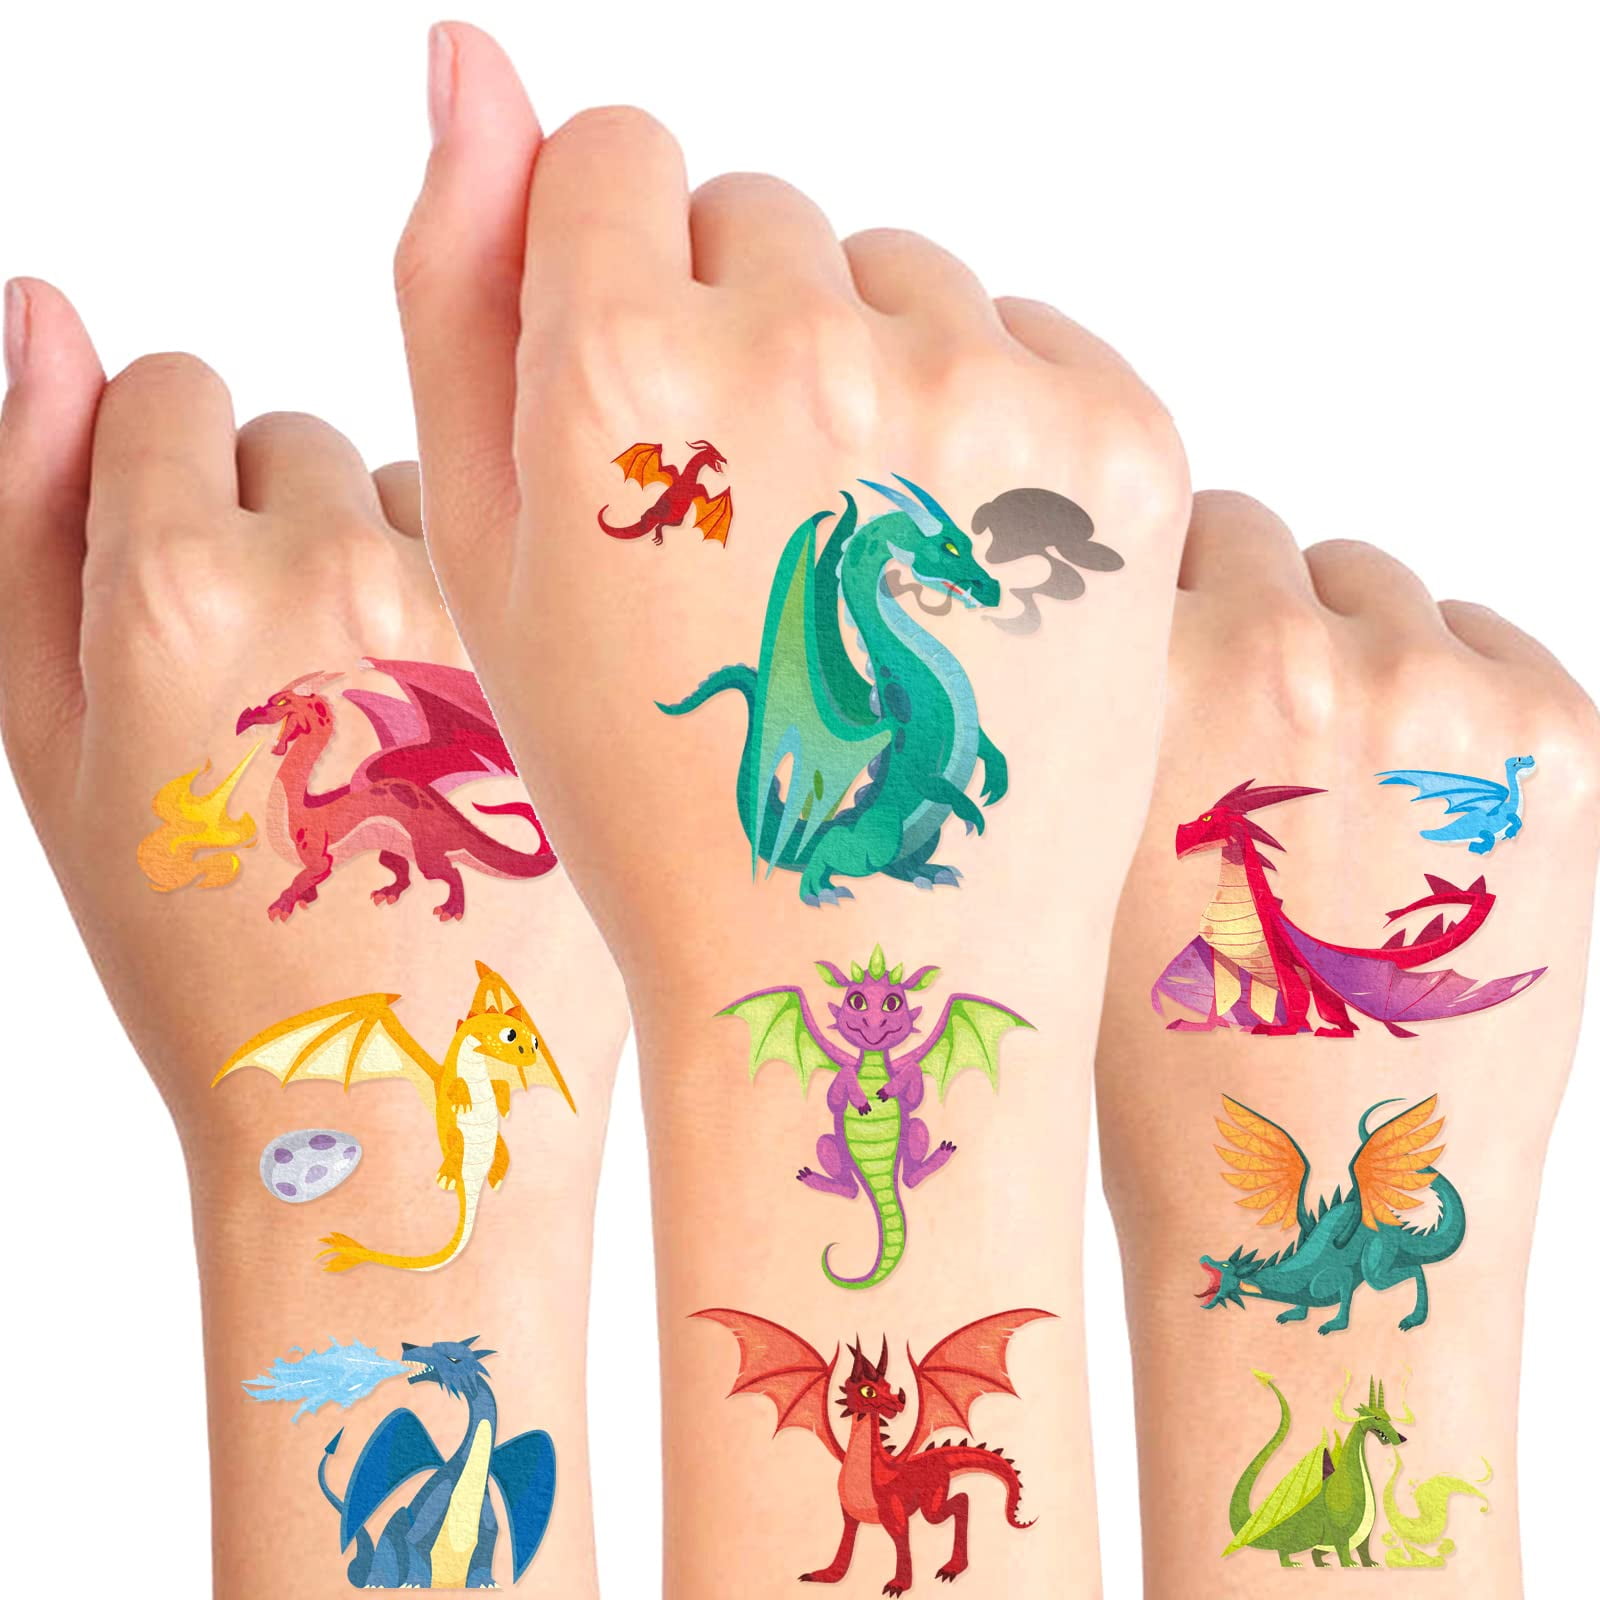 Dragon Tattoos Party Supplies Decorations Favors - Magic Dragon Waterproof  Temporary Video Cartoon Stickers for Girls Boys Kids Class Activity (  355pcs) 